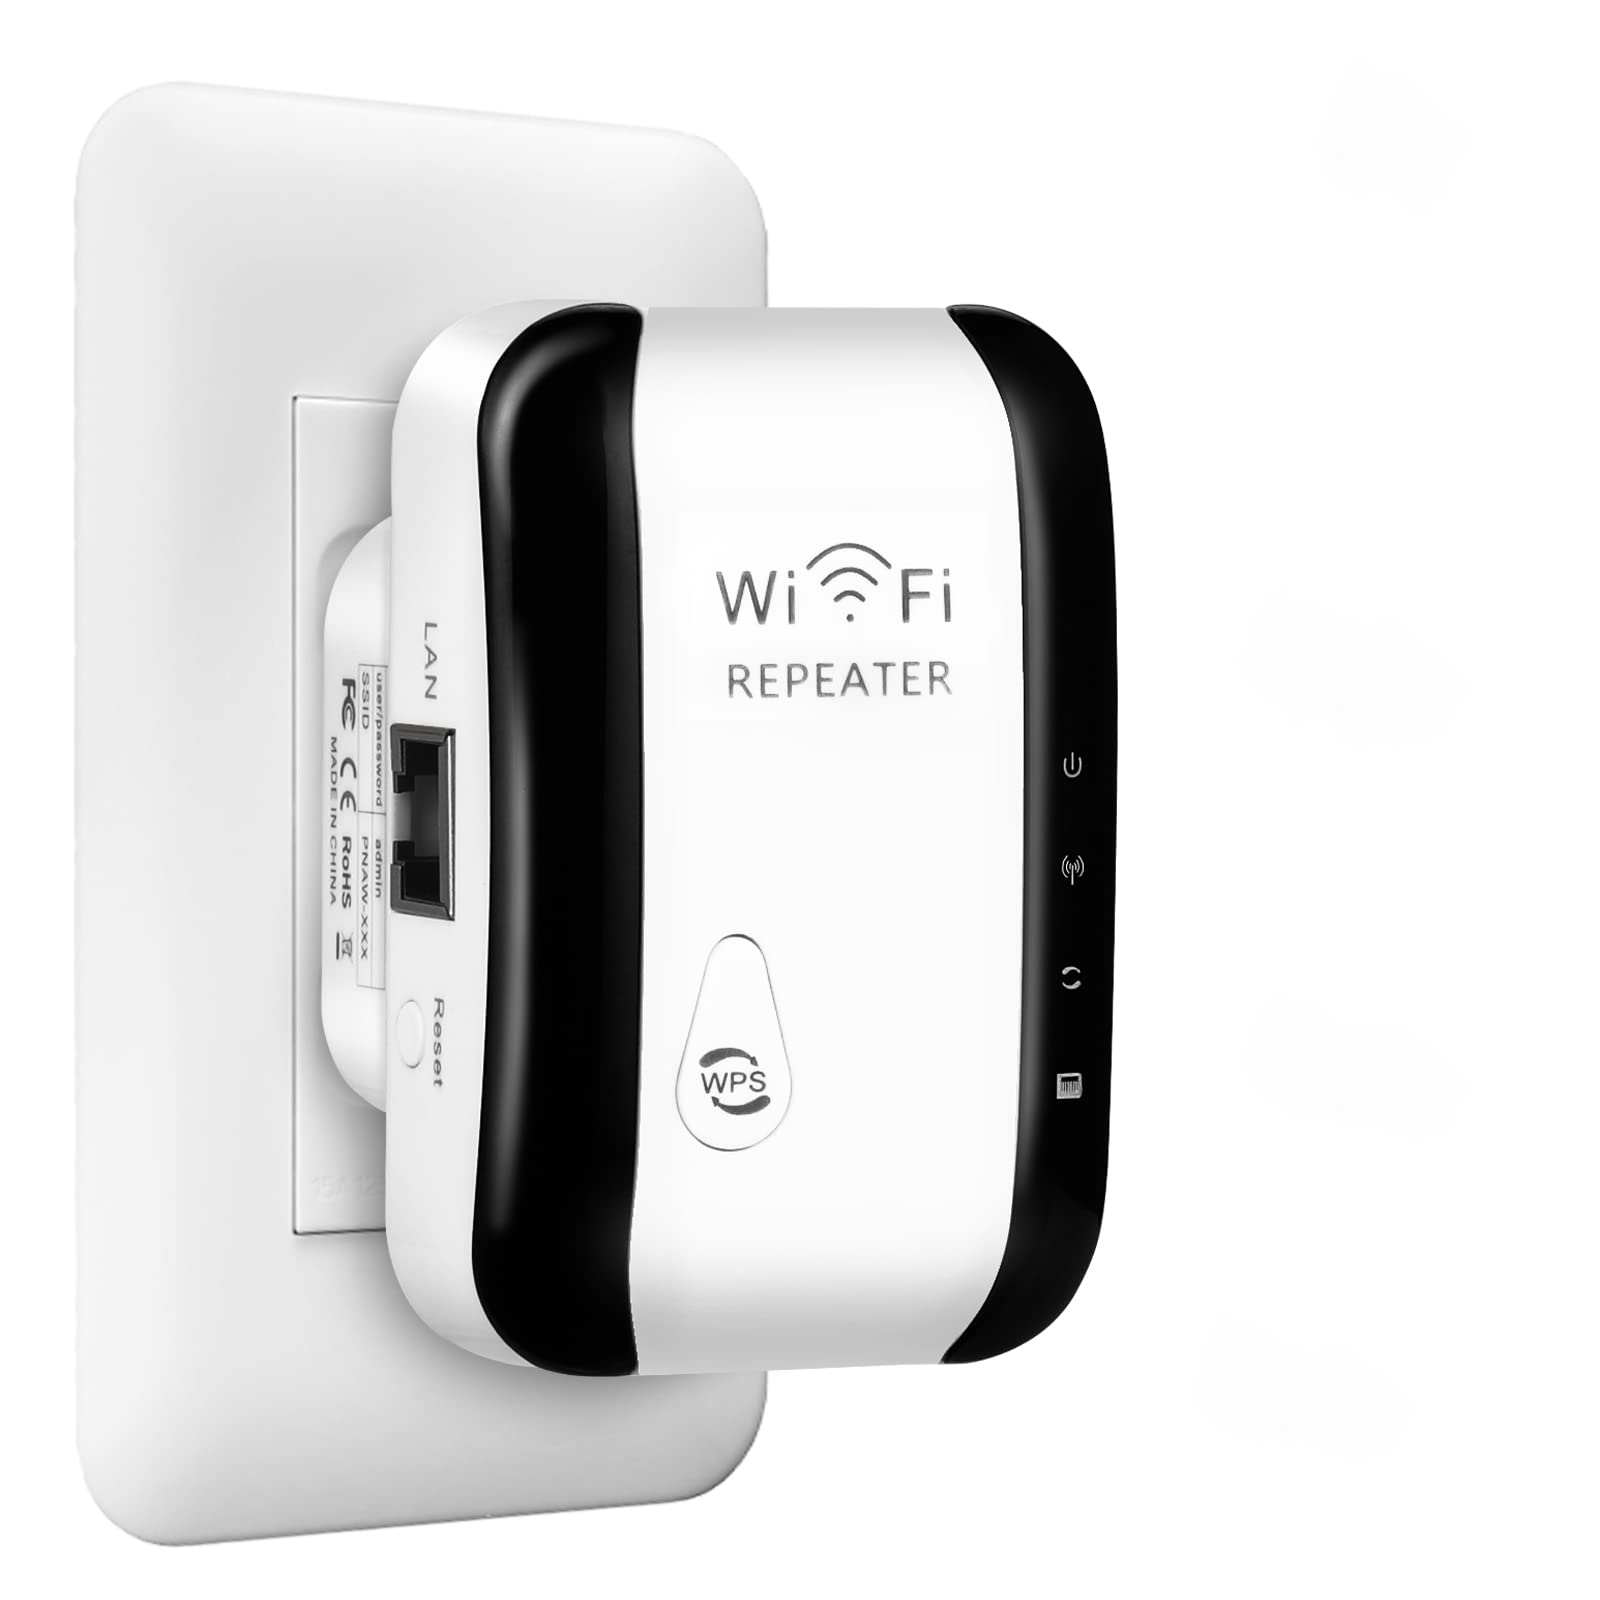 Ensure that your device is connected to a stable and reliable internet connection.
If using Wi-Fi, try moving closer to the router to improve the signal strength.